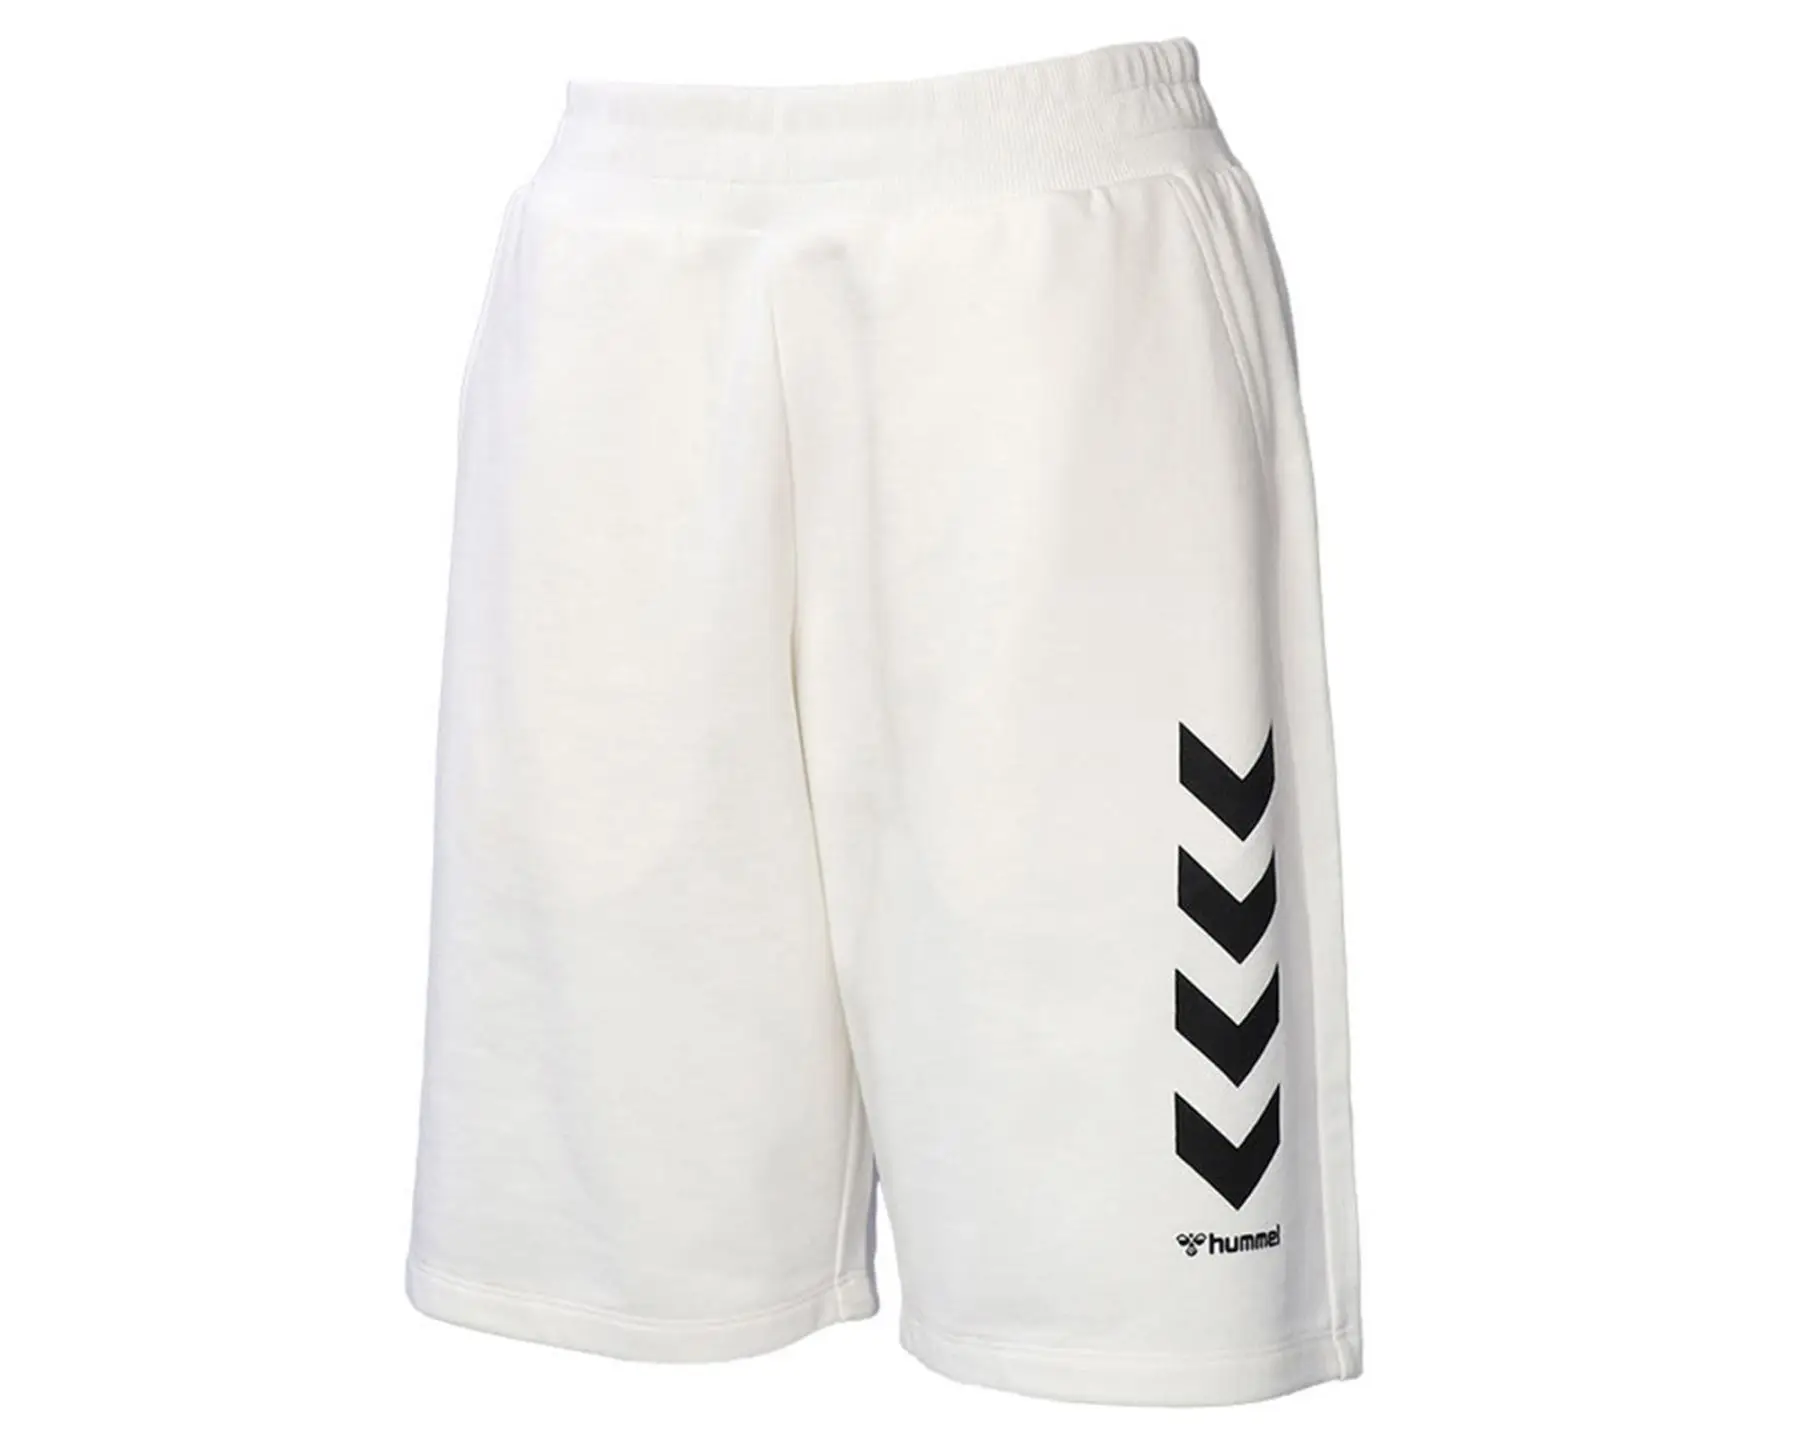 Hummel Original men's Casual Shorts White Color Comfortable Shorts for Sporty and Comfortable Walking Elastic Waist Structure